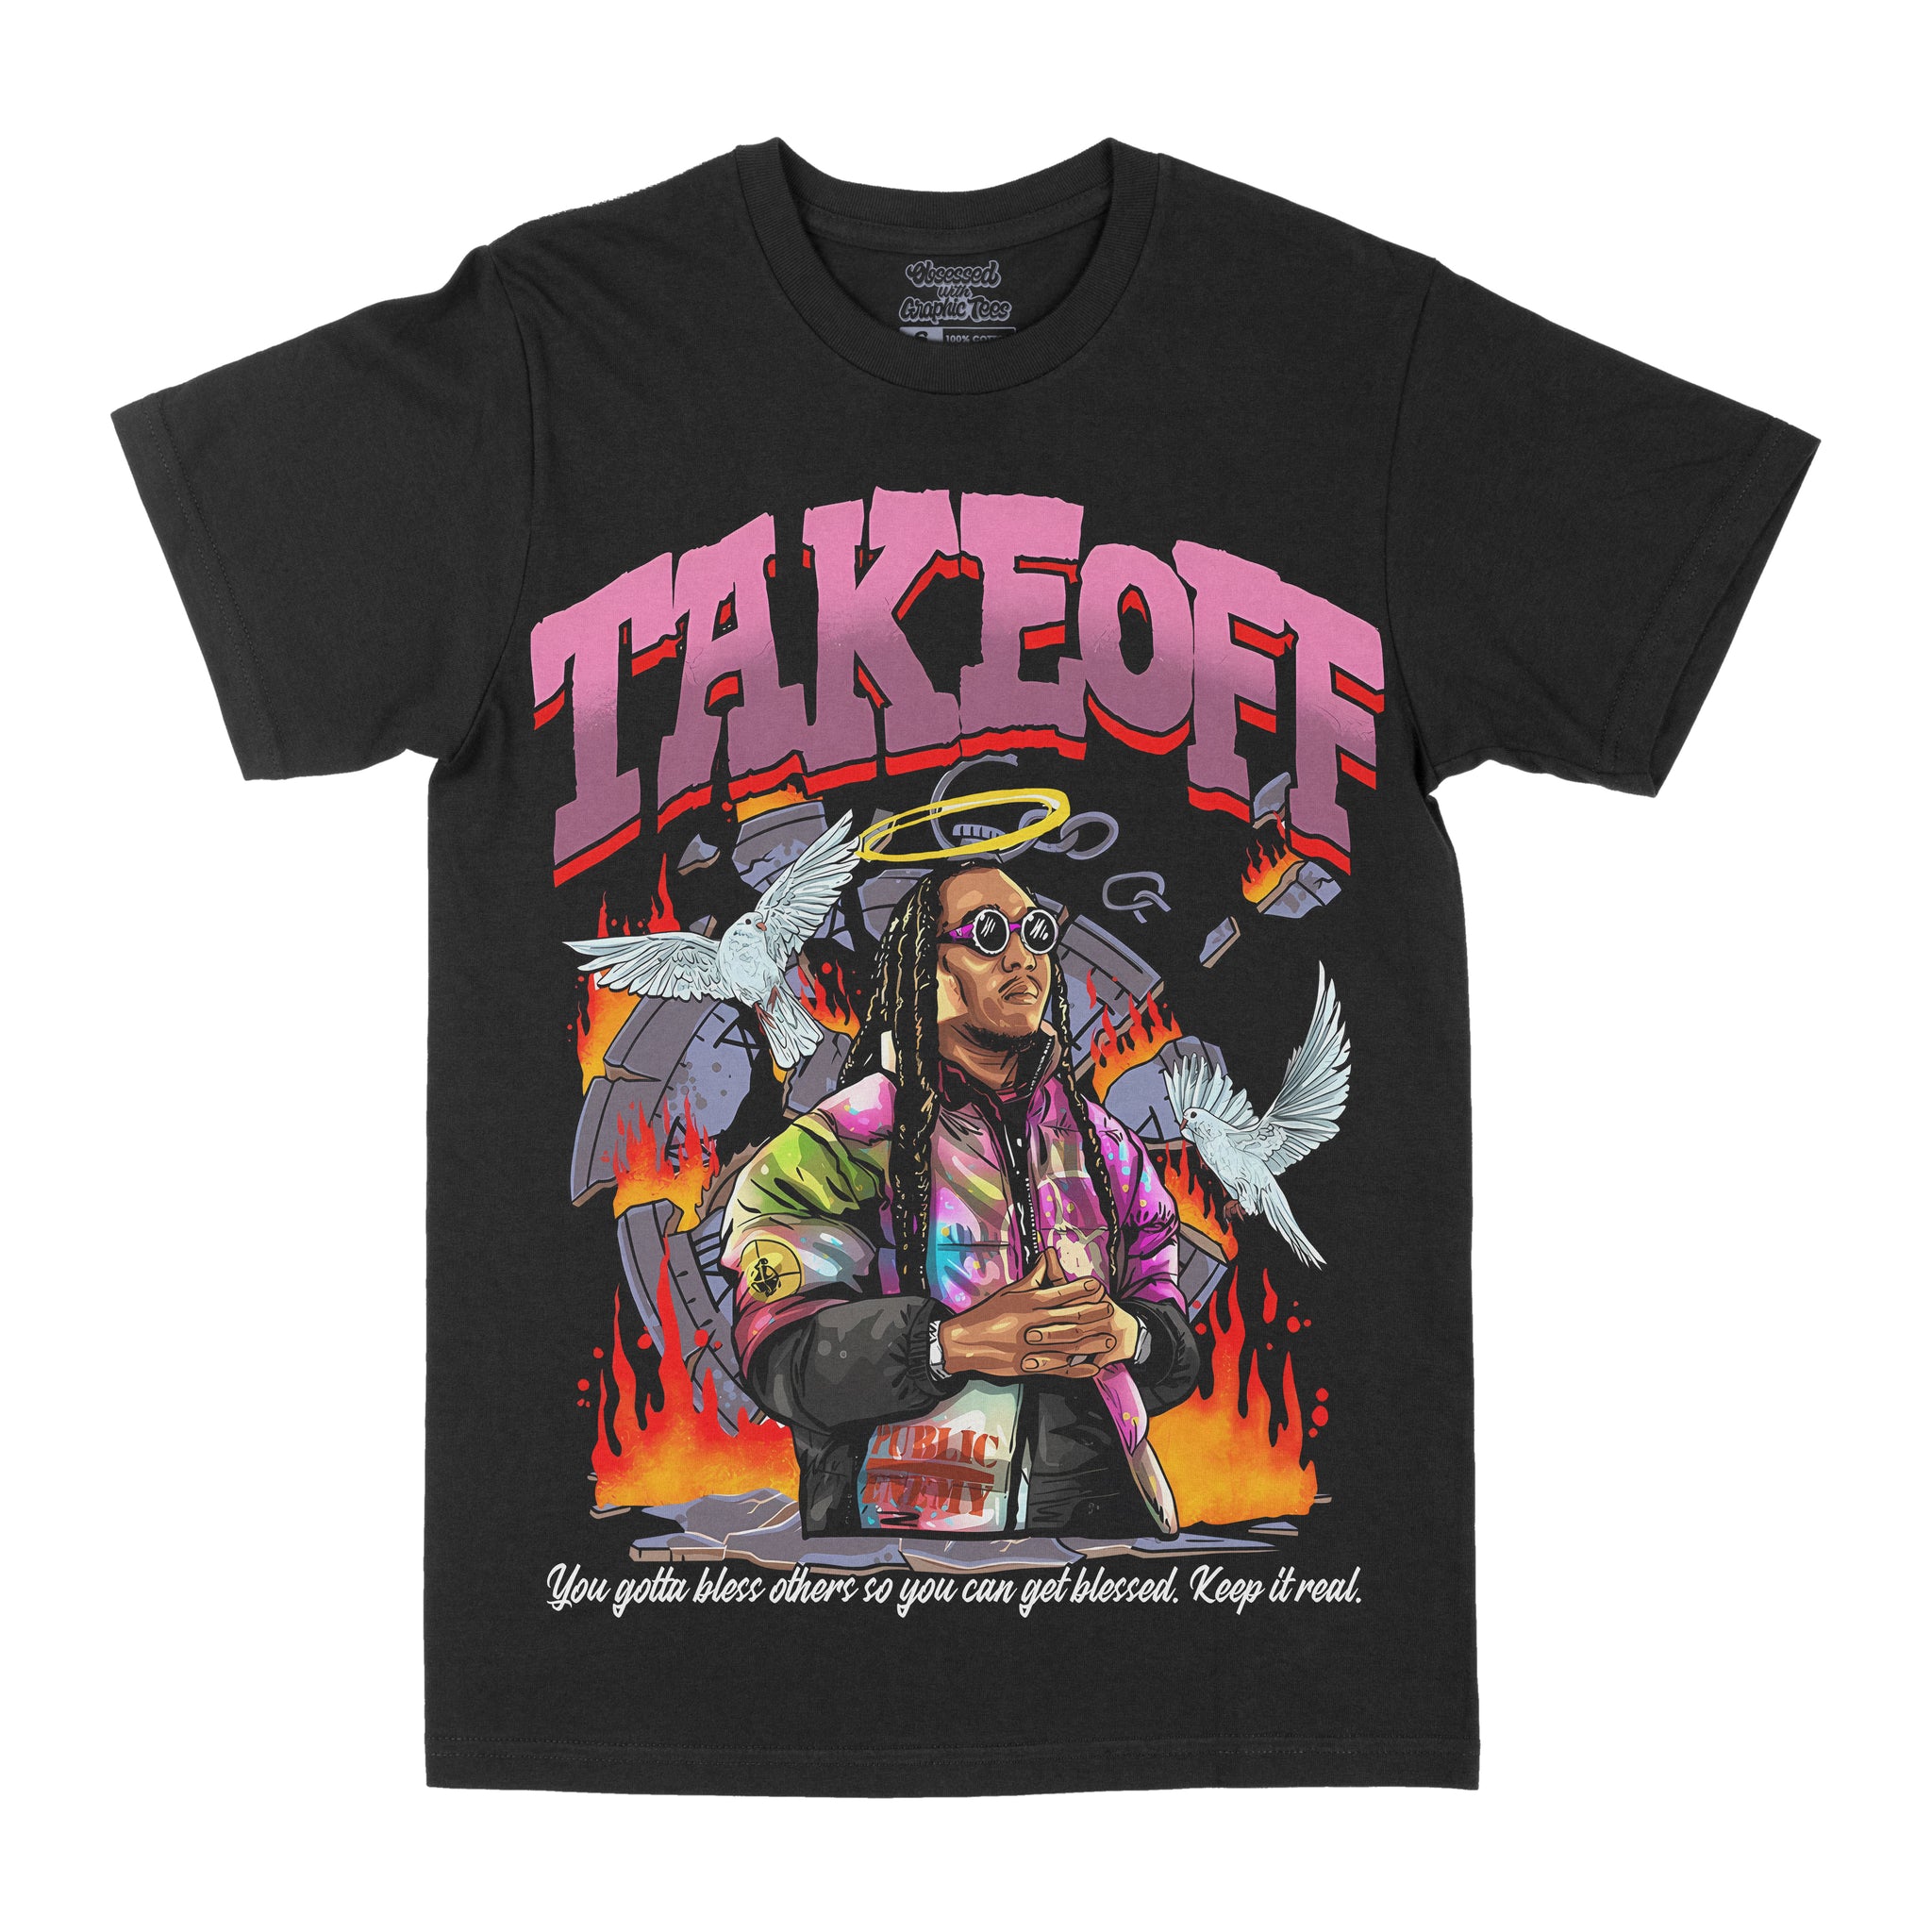 Takeoff "Keep It Real" Graphic Tee